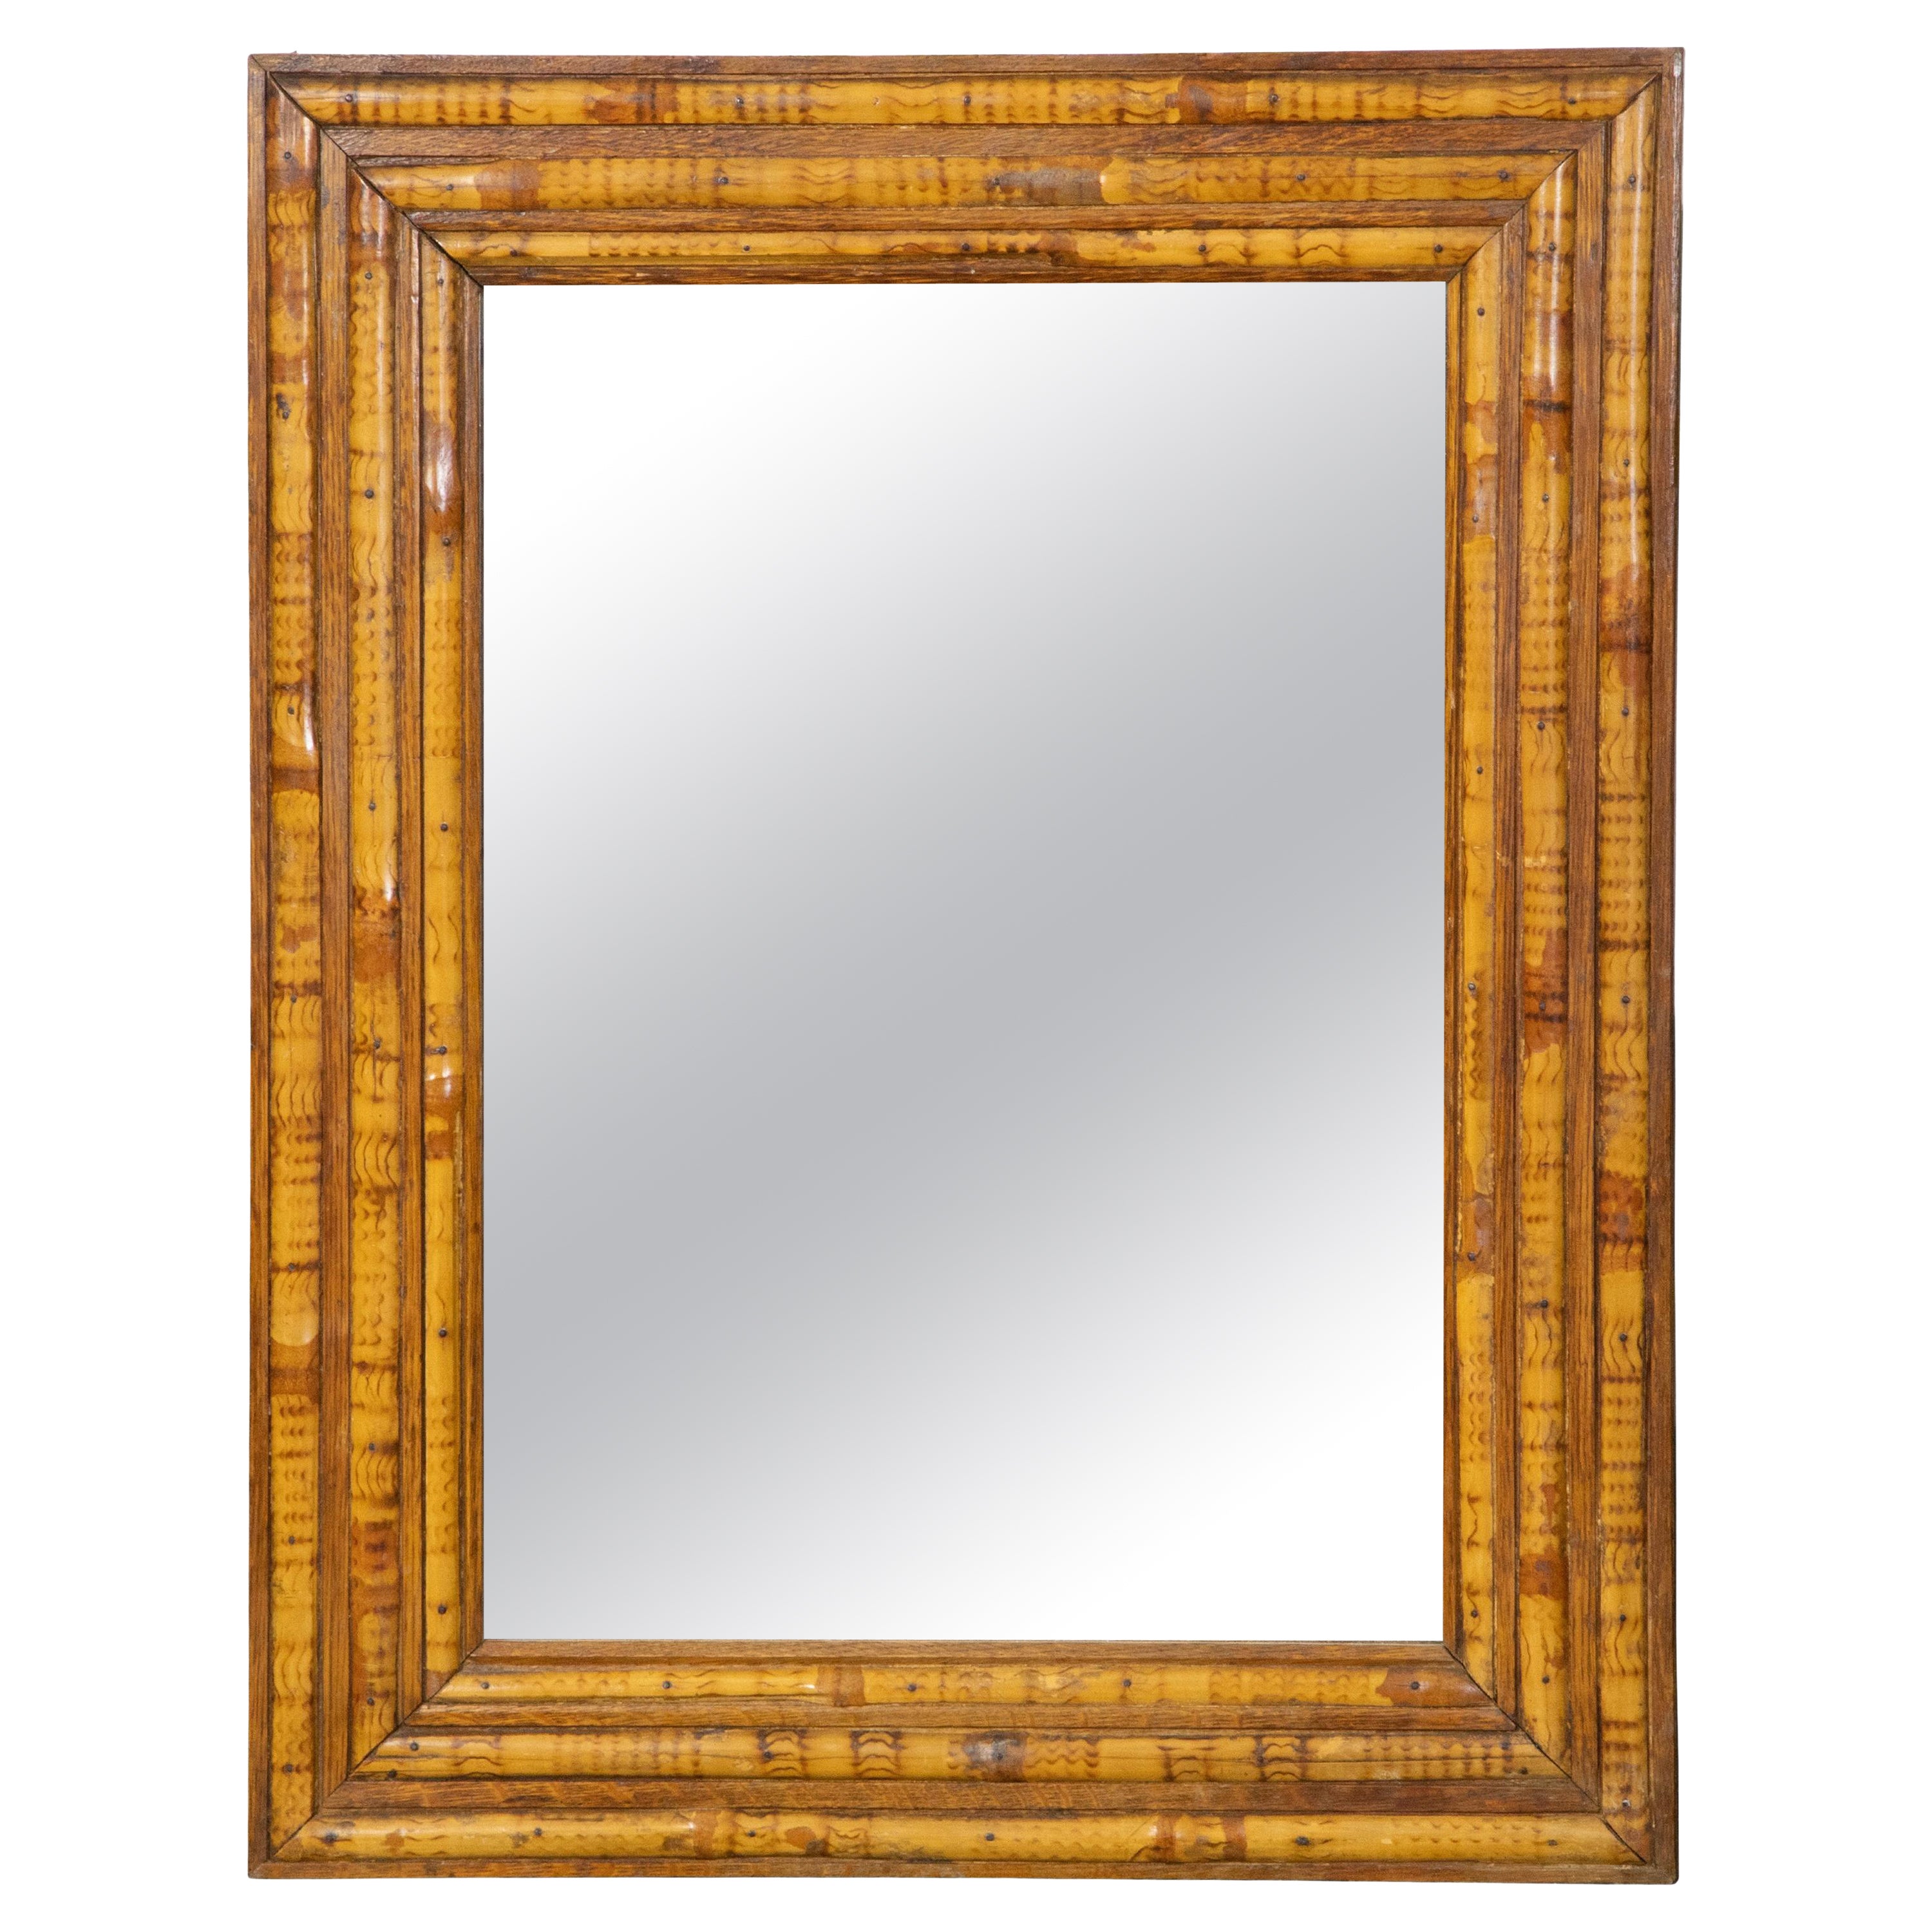 English Midcentury Bamboo and Wood Wall Mirror with Alternating Design